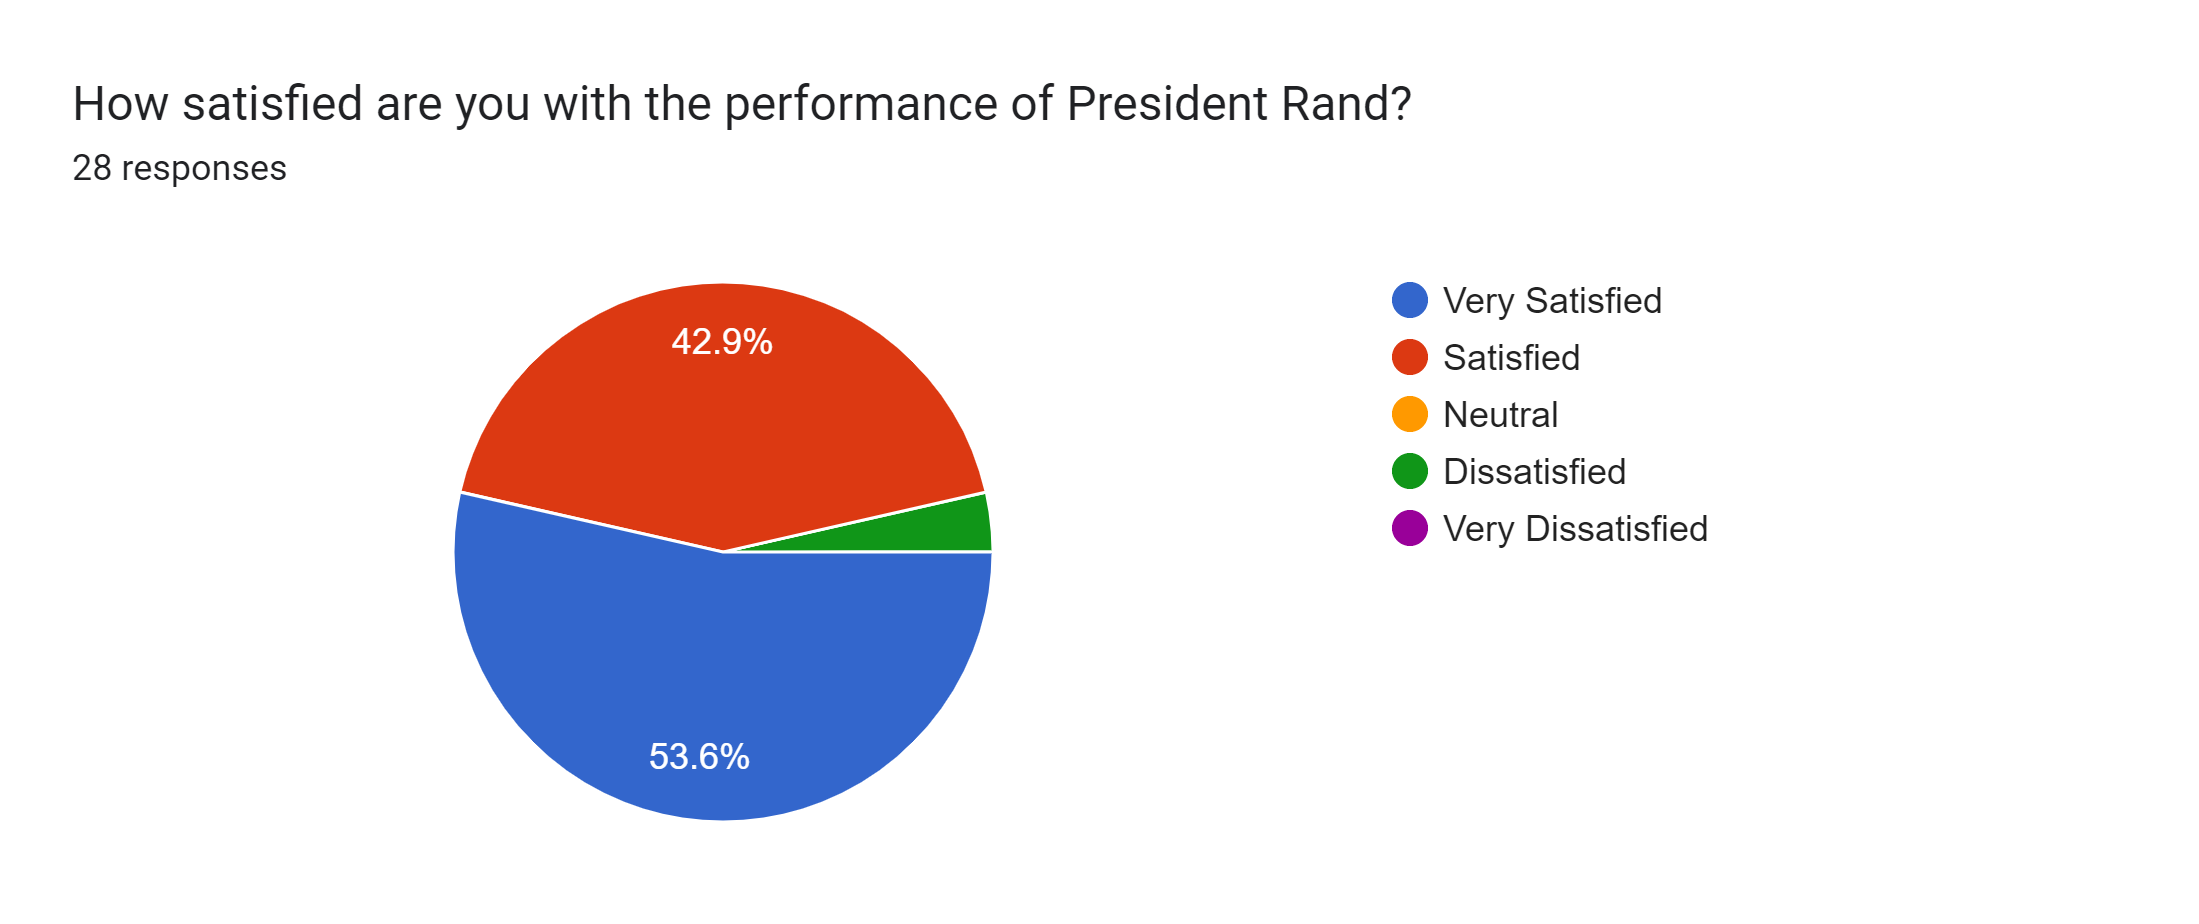 Forms response chart. Question title: How satisfied are you with the performance of President Rand?. Number of responses: 28 responses.